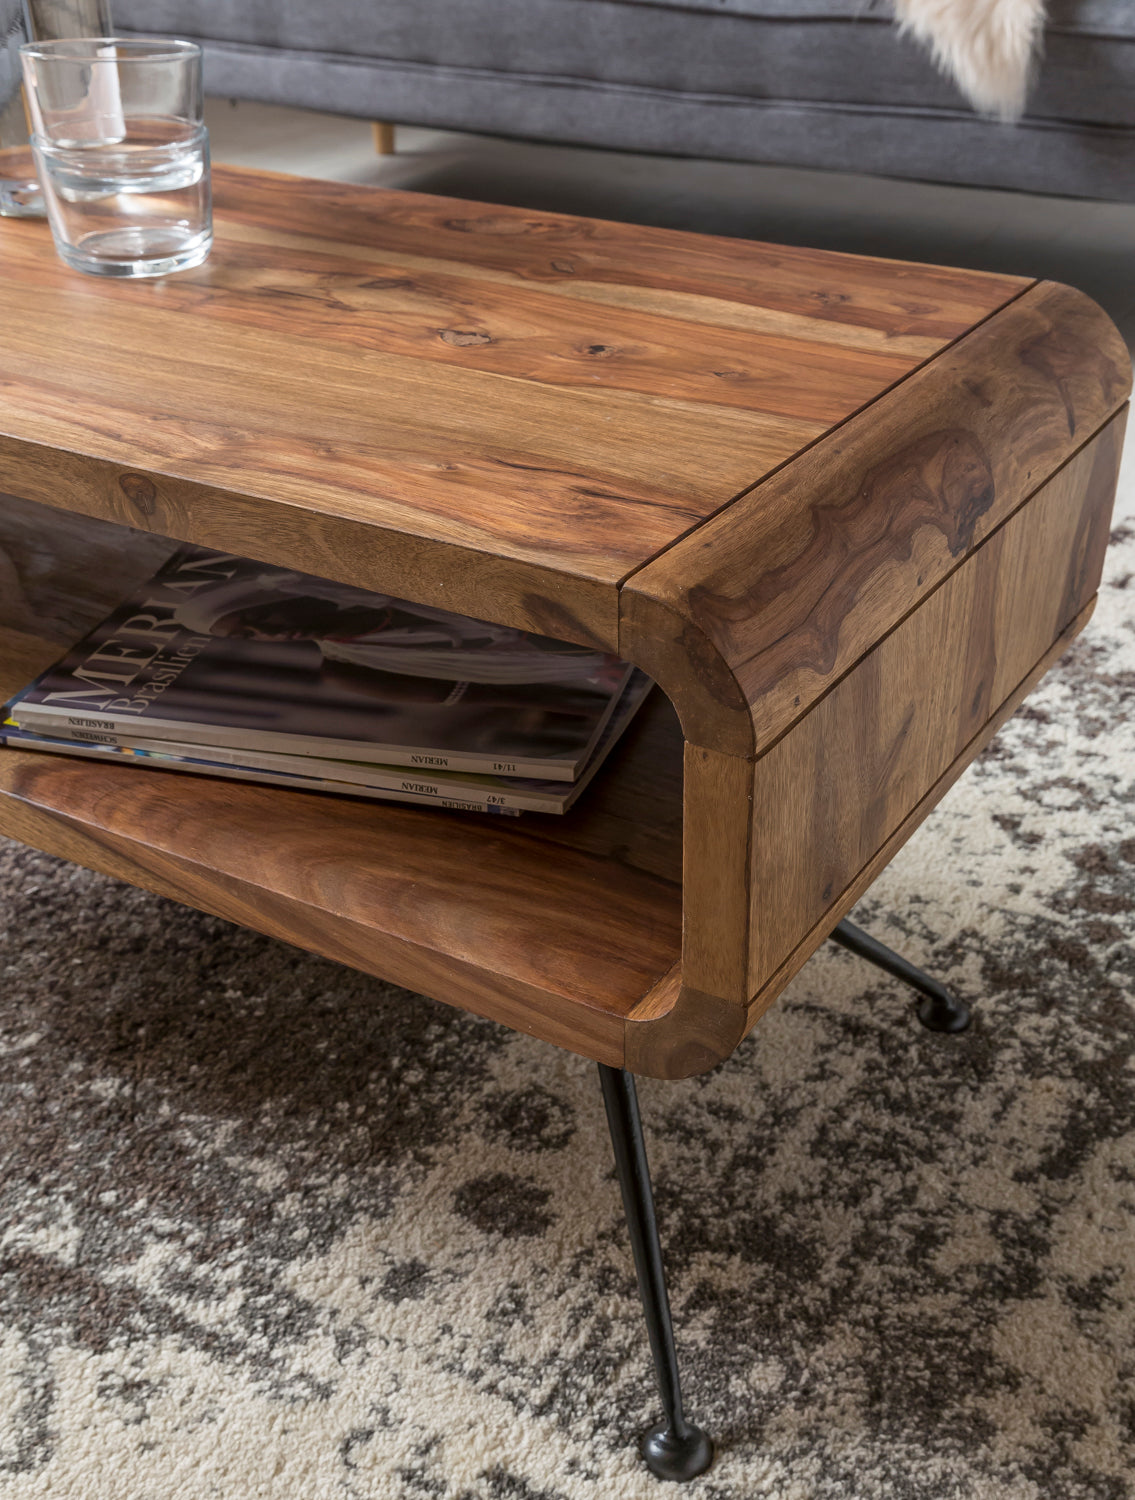 Sheera Solid Wood Center Table